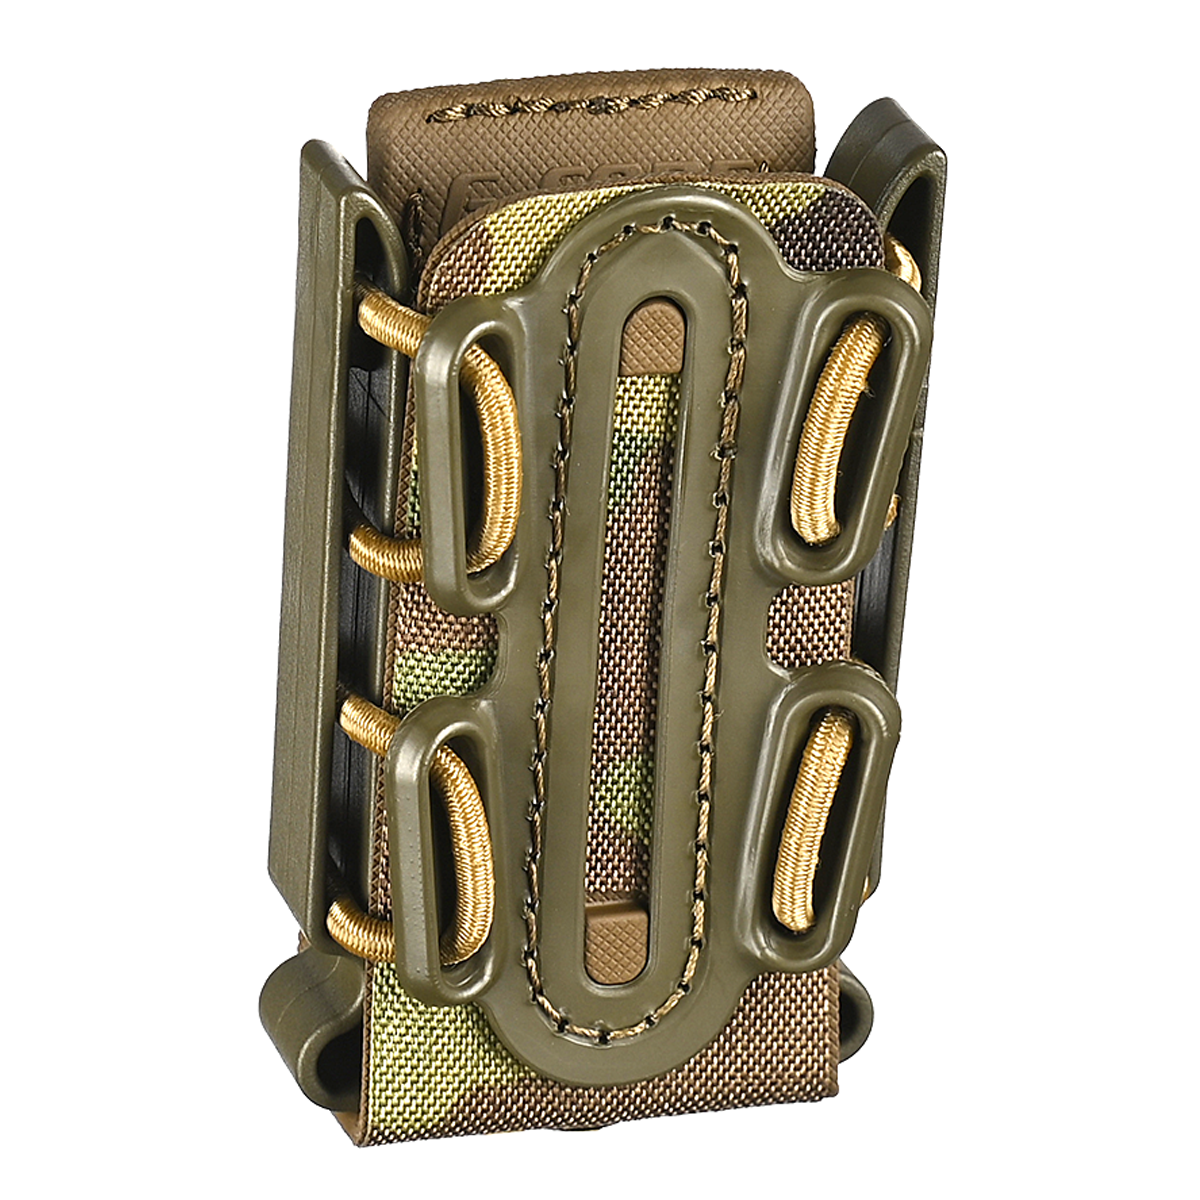 Details about   Tactical Scorpion Soft Shell 9mm Pistol Magazine Pouch Carrier Tall w/ Belt Loop 